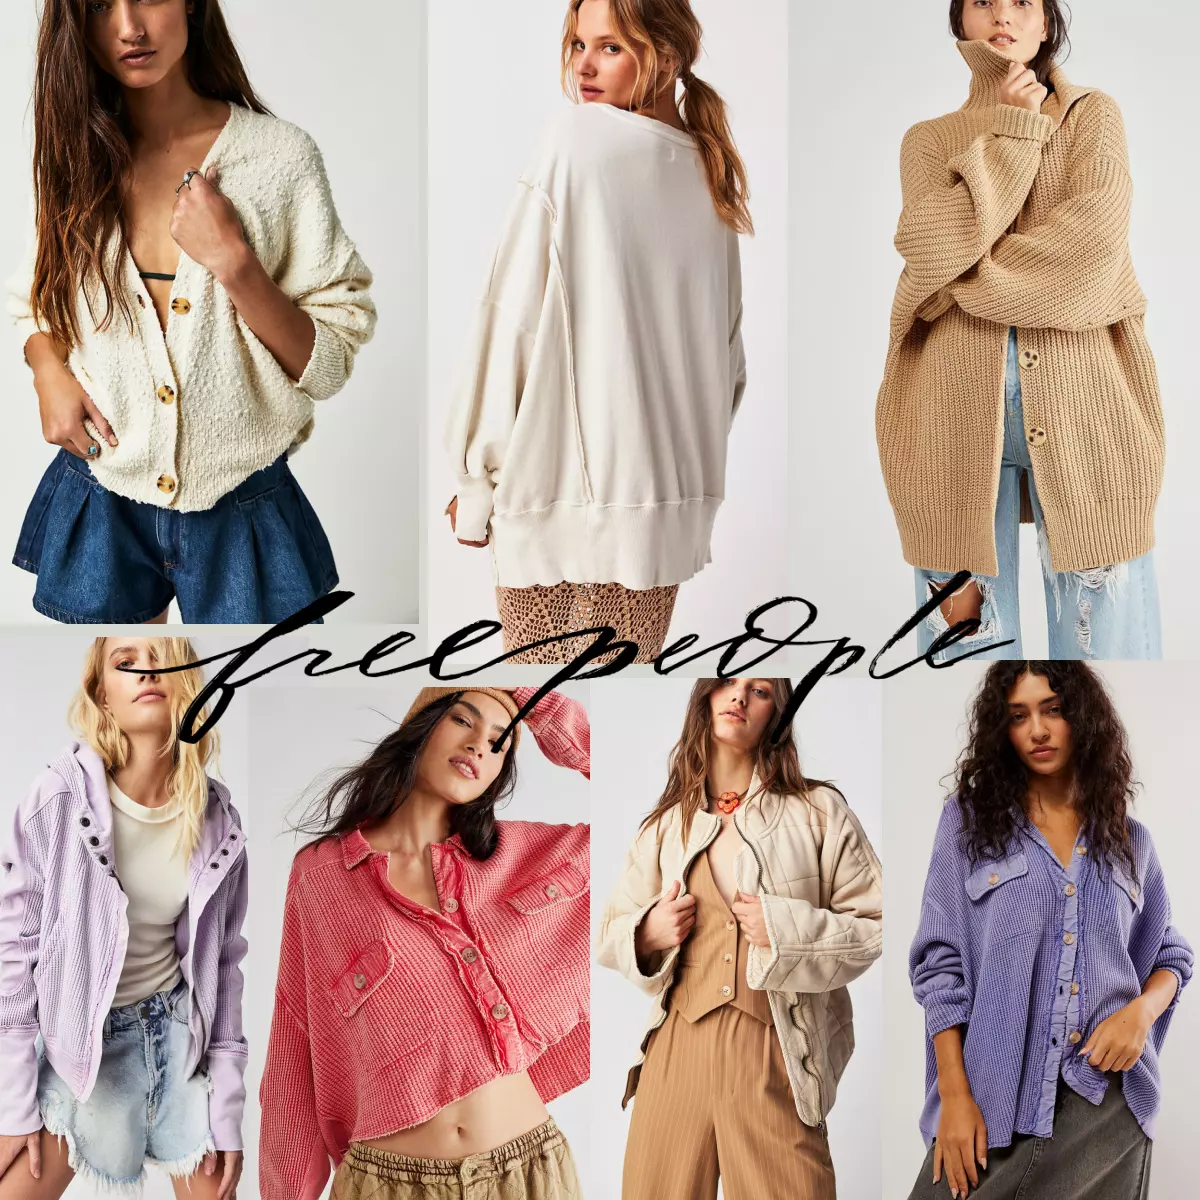 Clothes collage of Free People dupes clothes.